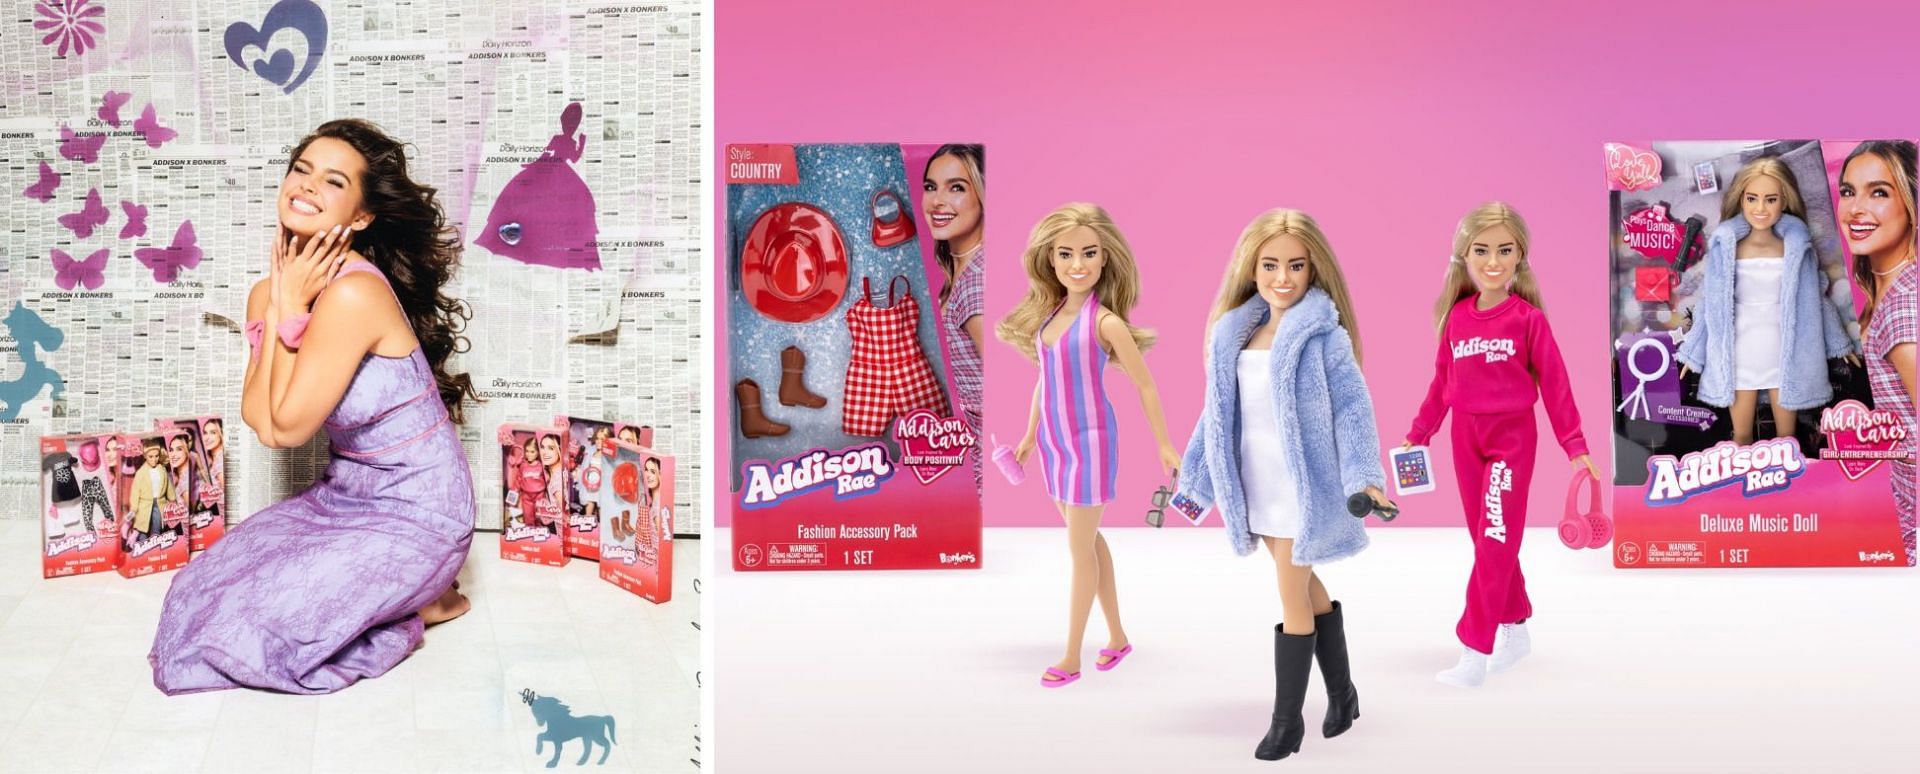 Addison launches her line of Toys and Dolls in collaboration with Bonkers Toys. (Image via @whoisaddison/ Twitter)